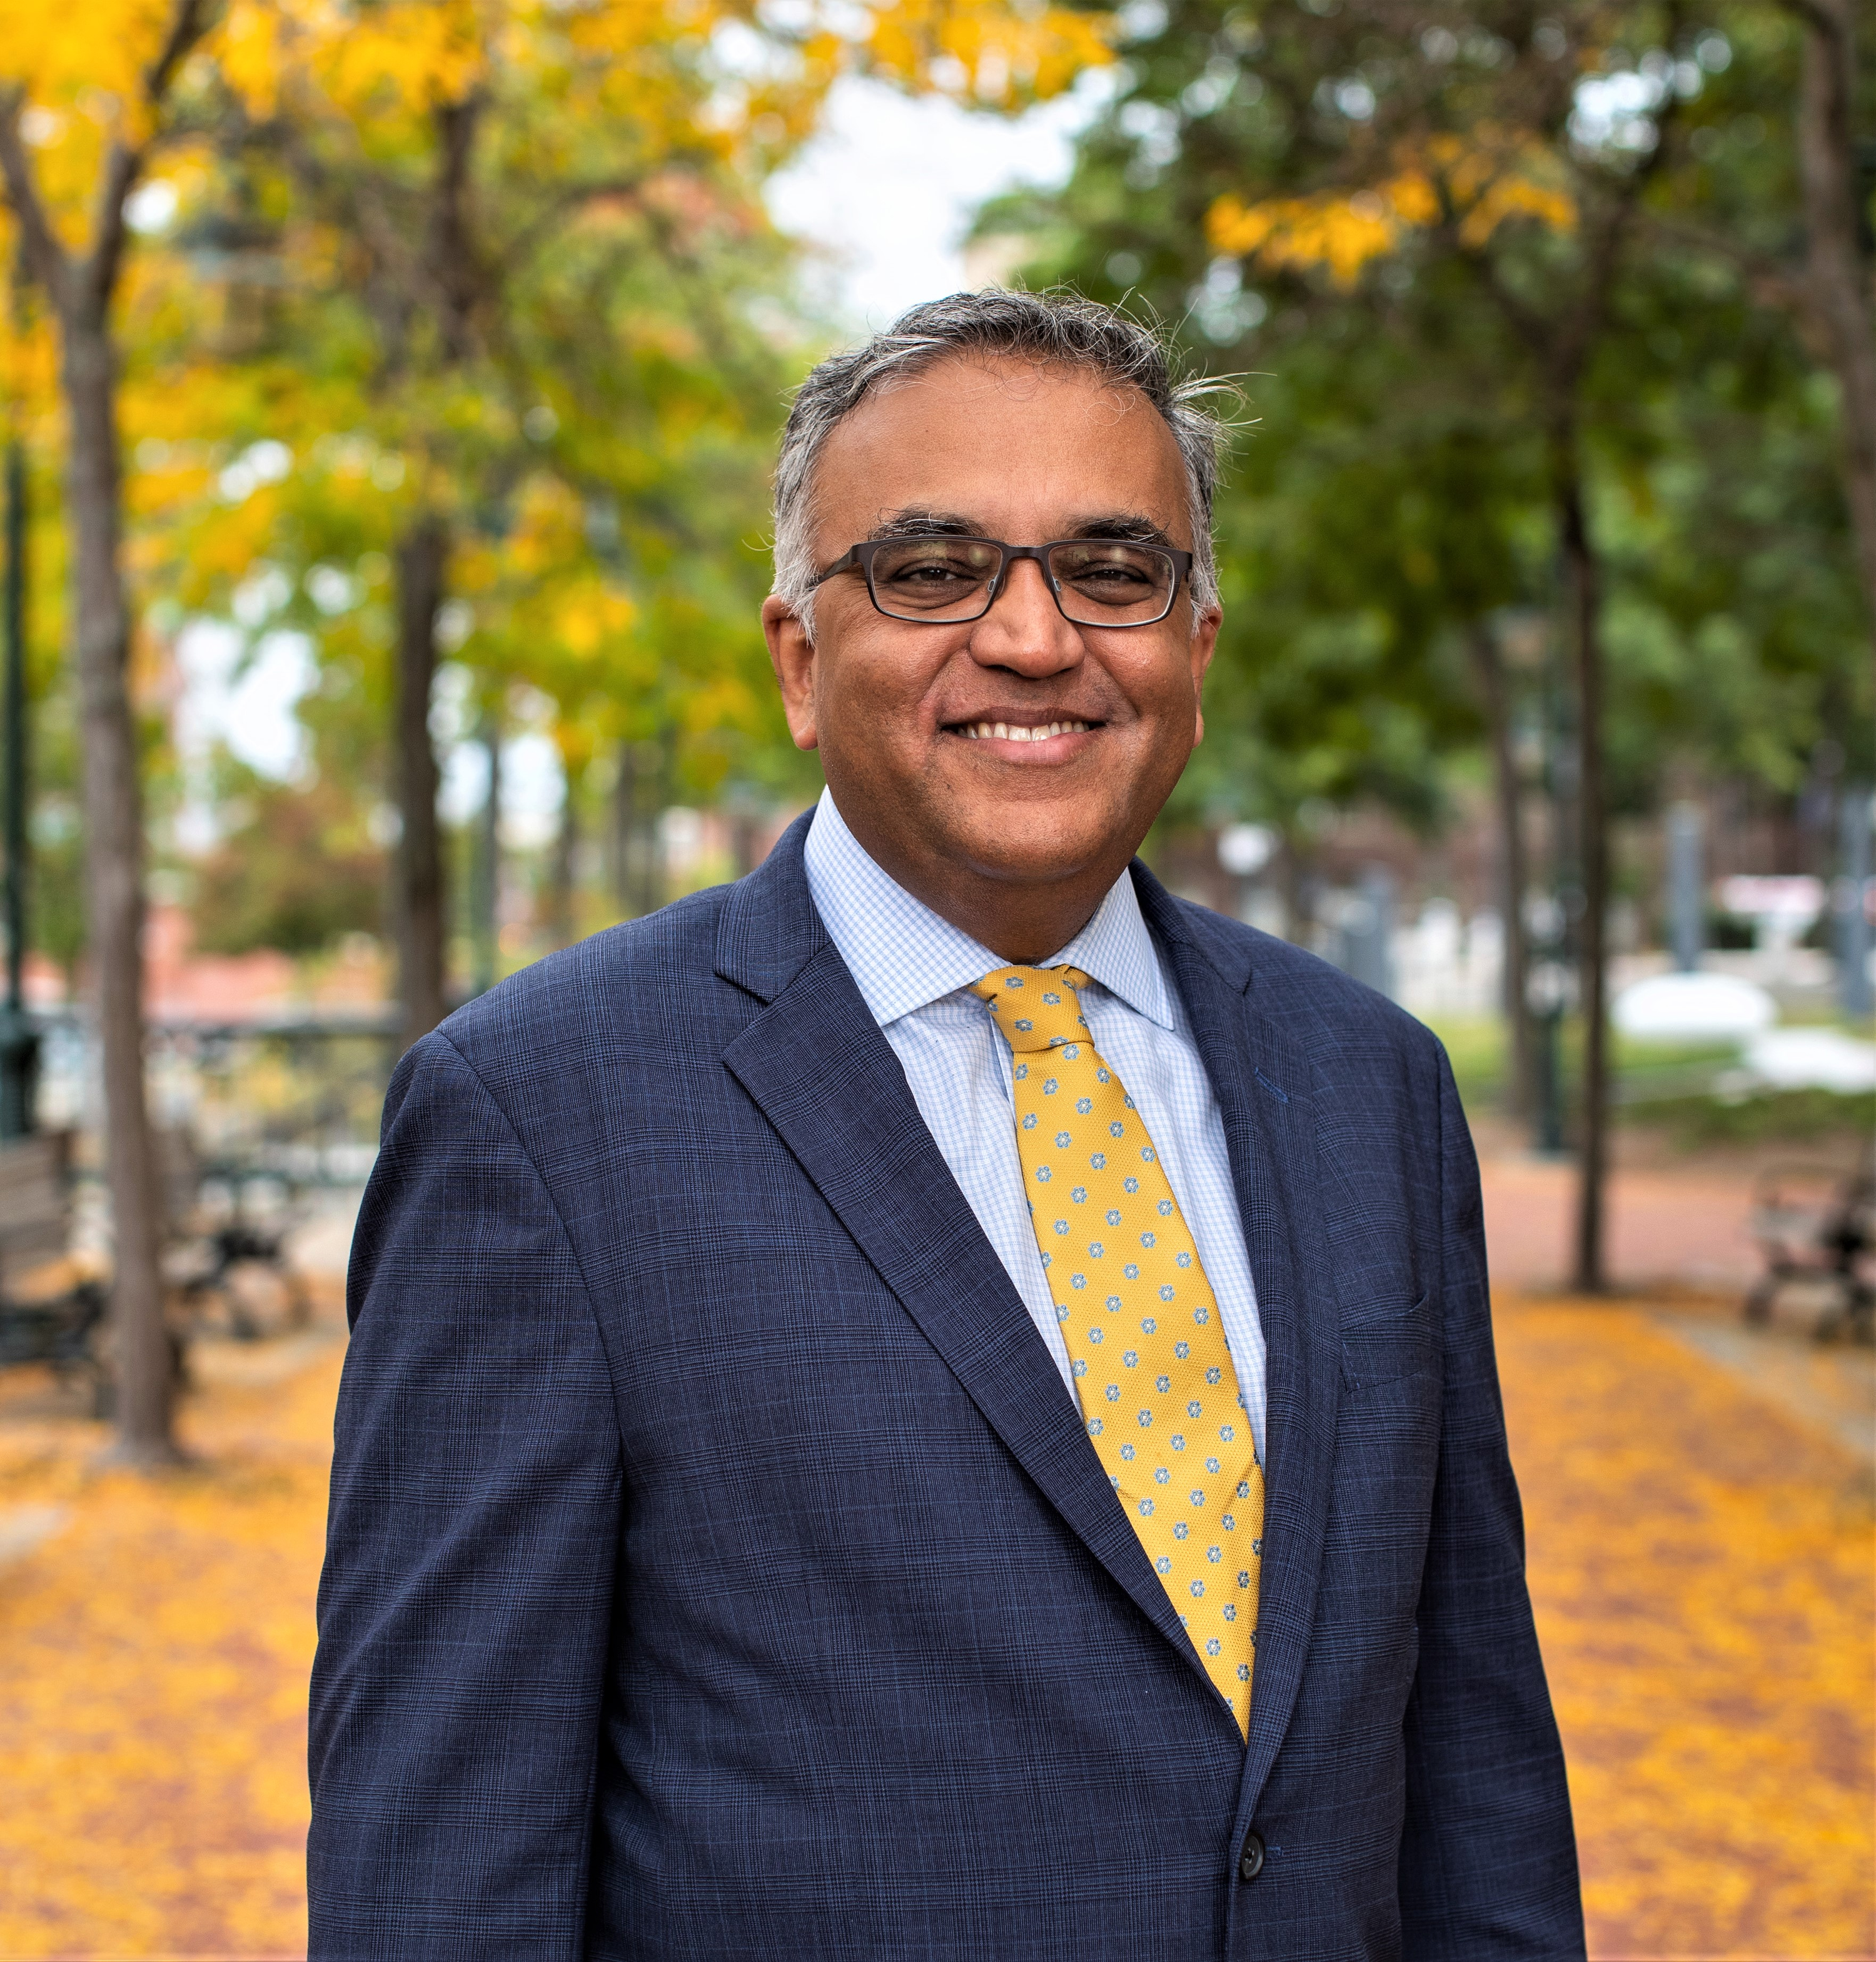 Welcome to Episode 18 of “COVID: What comes next,” an exclusive weekly Providence Journal/USA TODAY NETWORK podcast featuring Dr. Ashish Jha, dean of the Brown University School of Public Health and an internationally respected expert on pandemic response and preparedness.